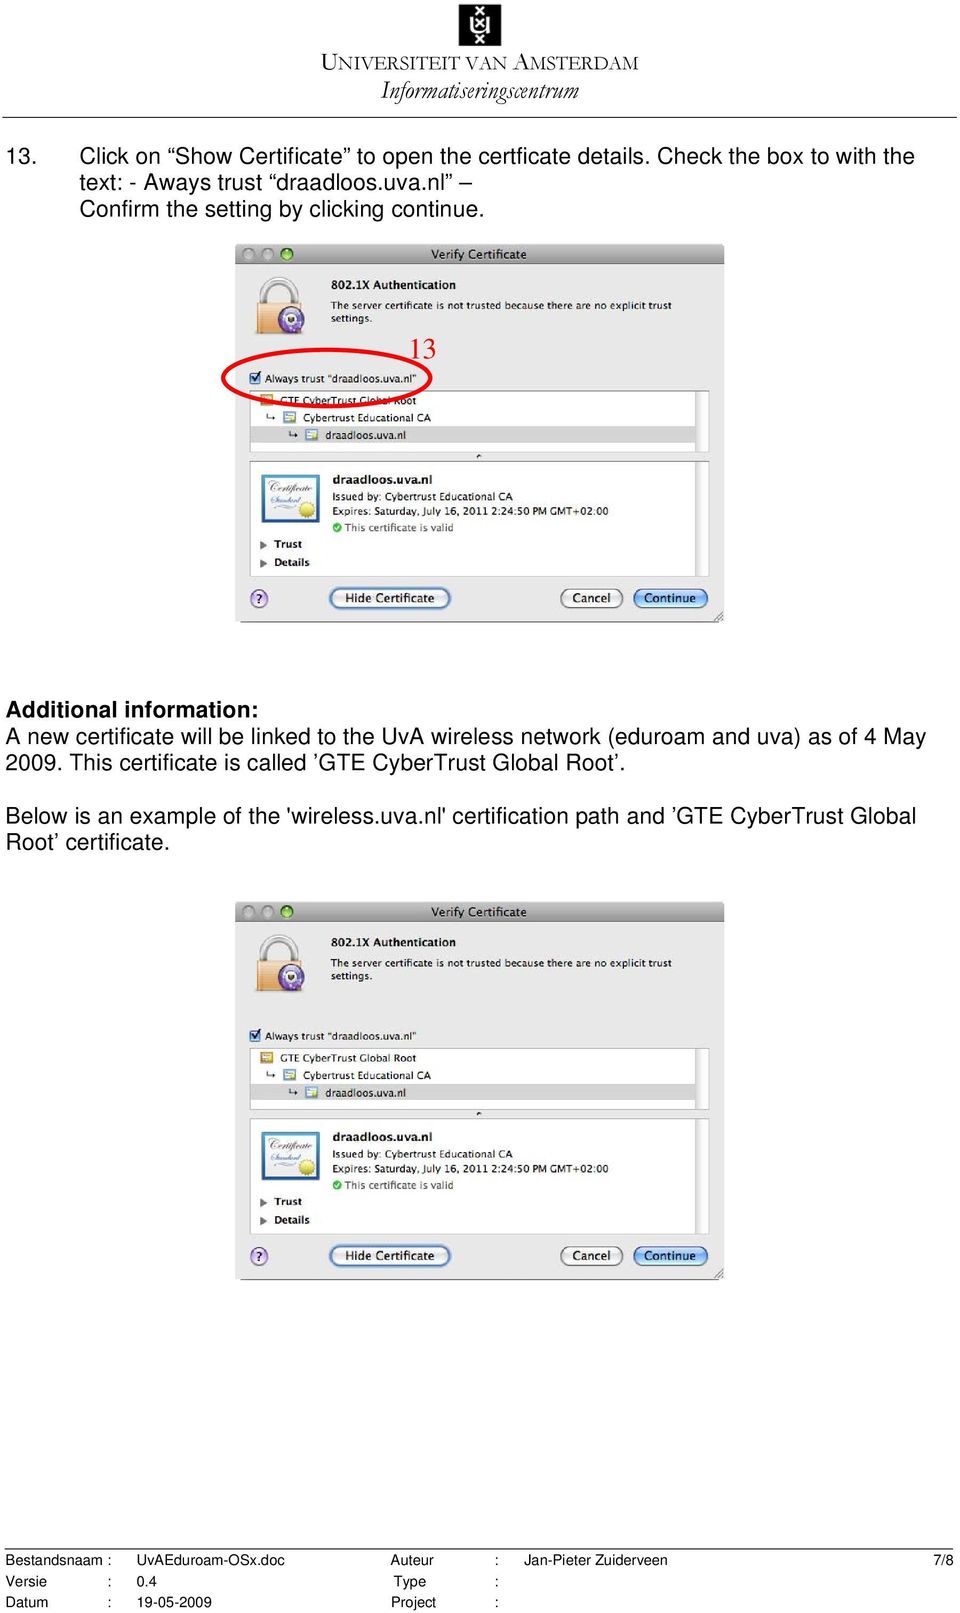 13 Additional information: A new certificate will be linked to the UvA wireless network (eduroam and uva) as of 4 May 2009.